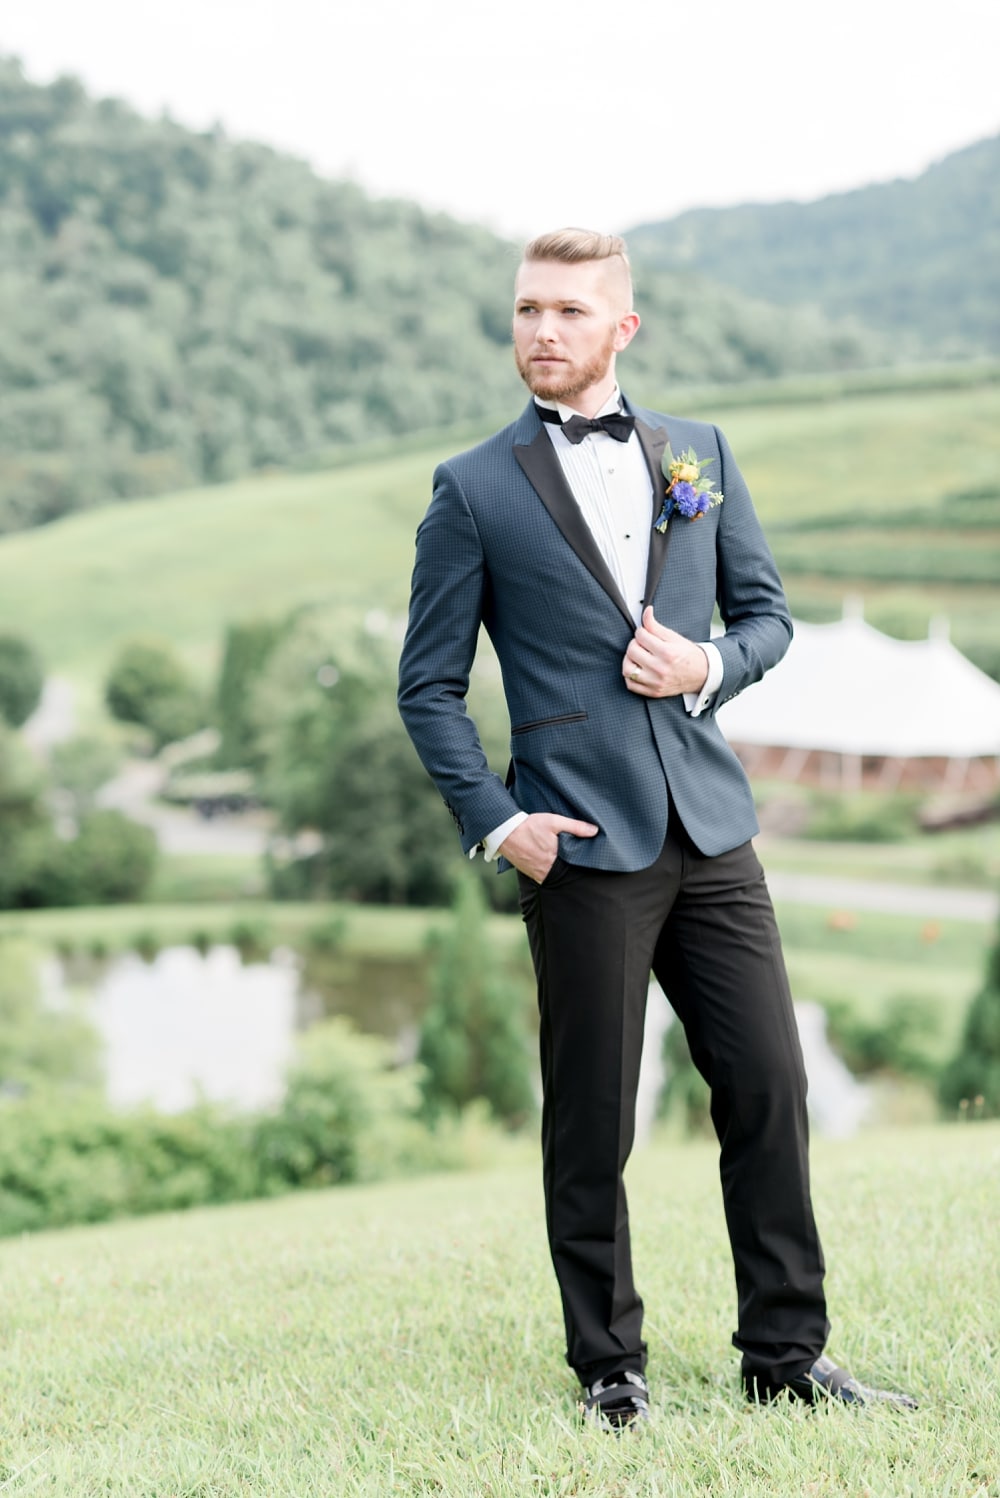 Groom standing for portrait at DelFosse Vineyards and Winery near Charlottesville VA